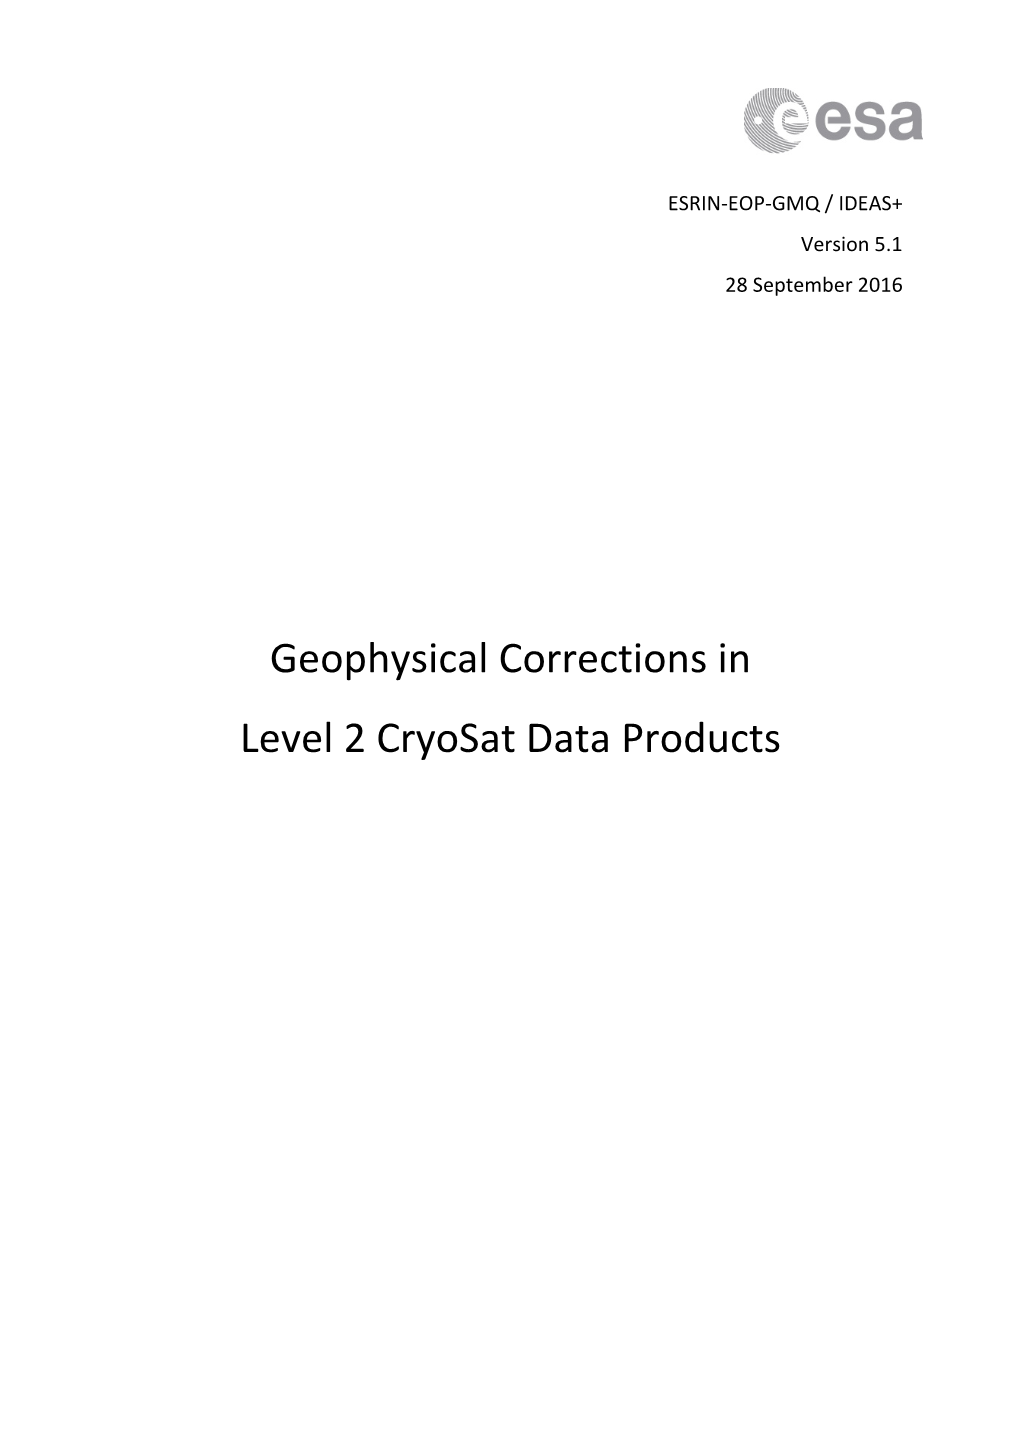 Geophysical Corrections in Level 2 Cryosat Data Products